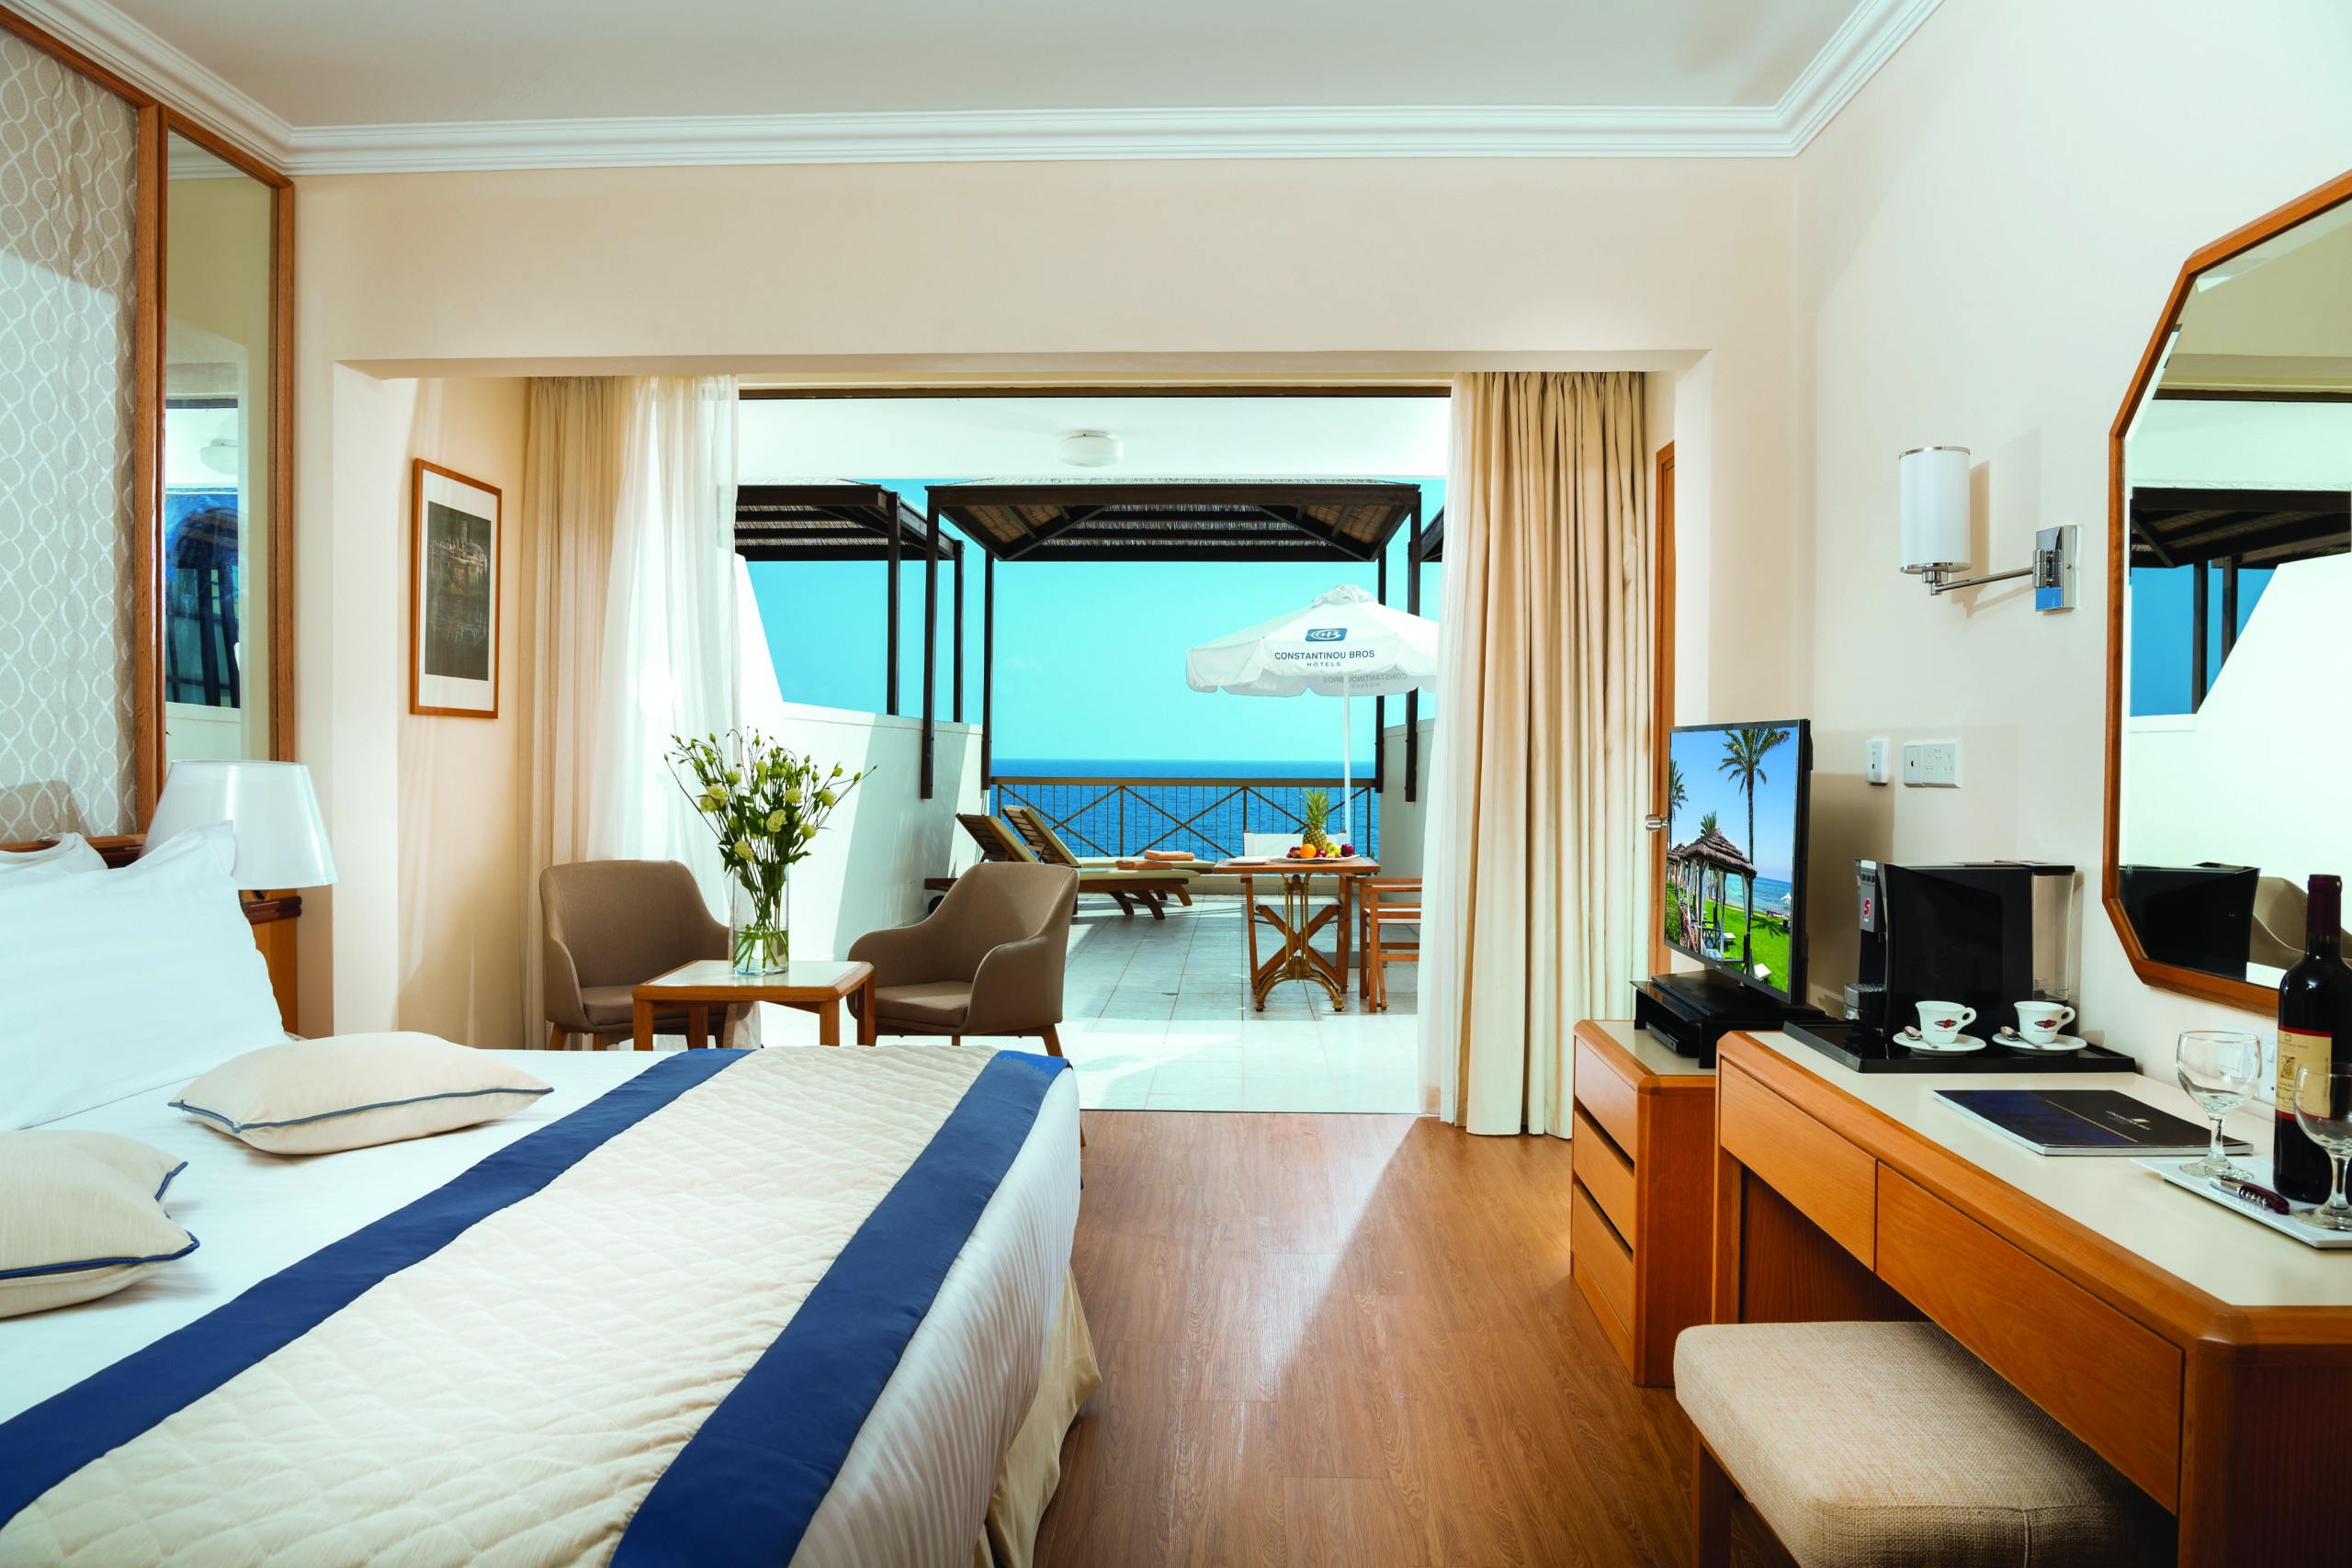 62 ATHENA BEACH HOTEL EXECUTIVE ONE & TWO BEDROOM SUITE WITH TERRACE